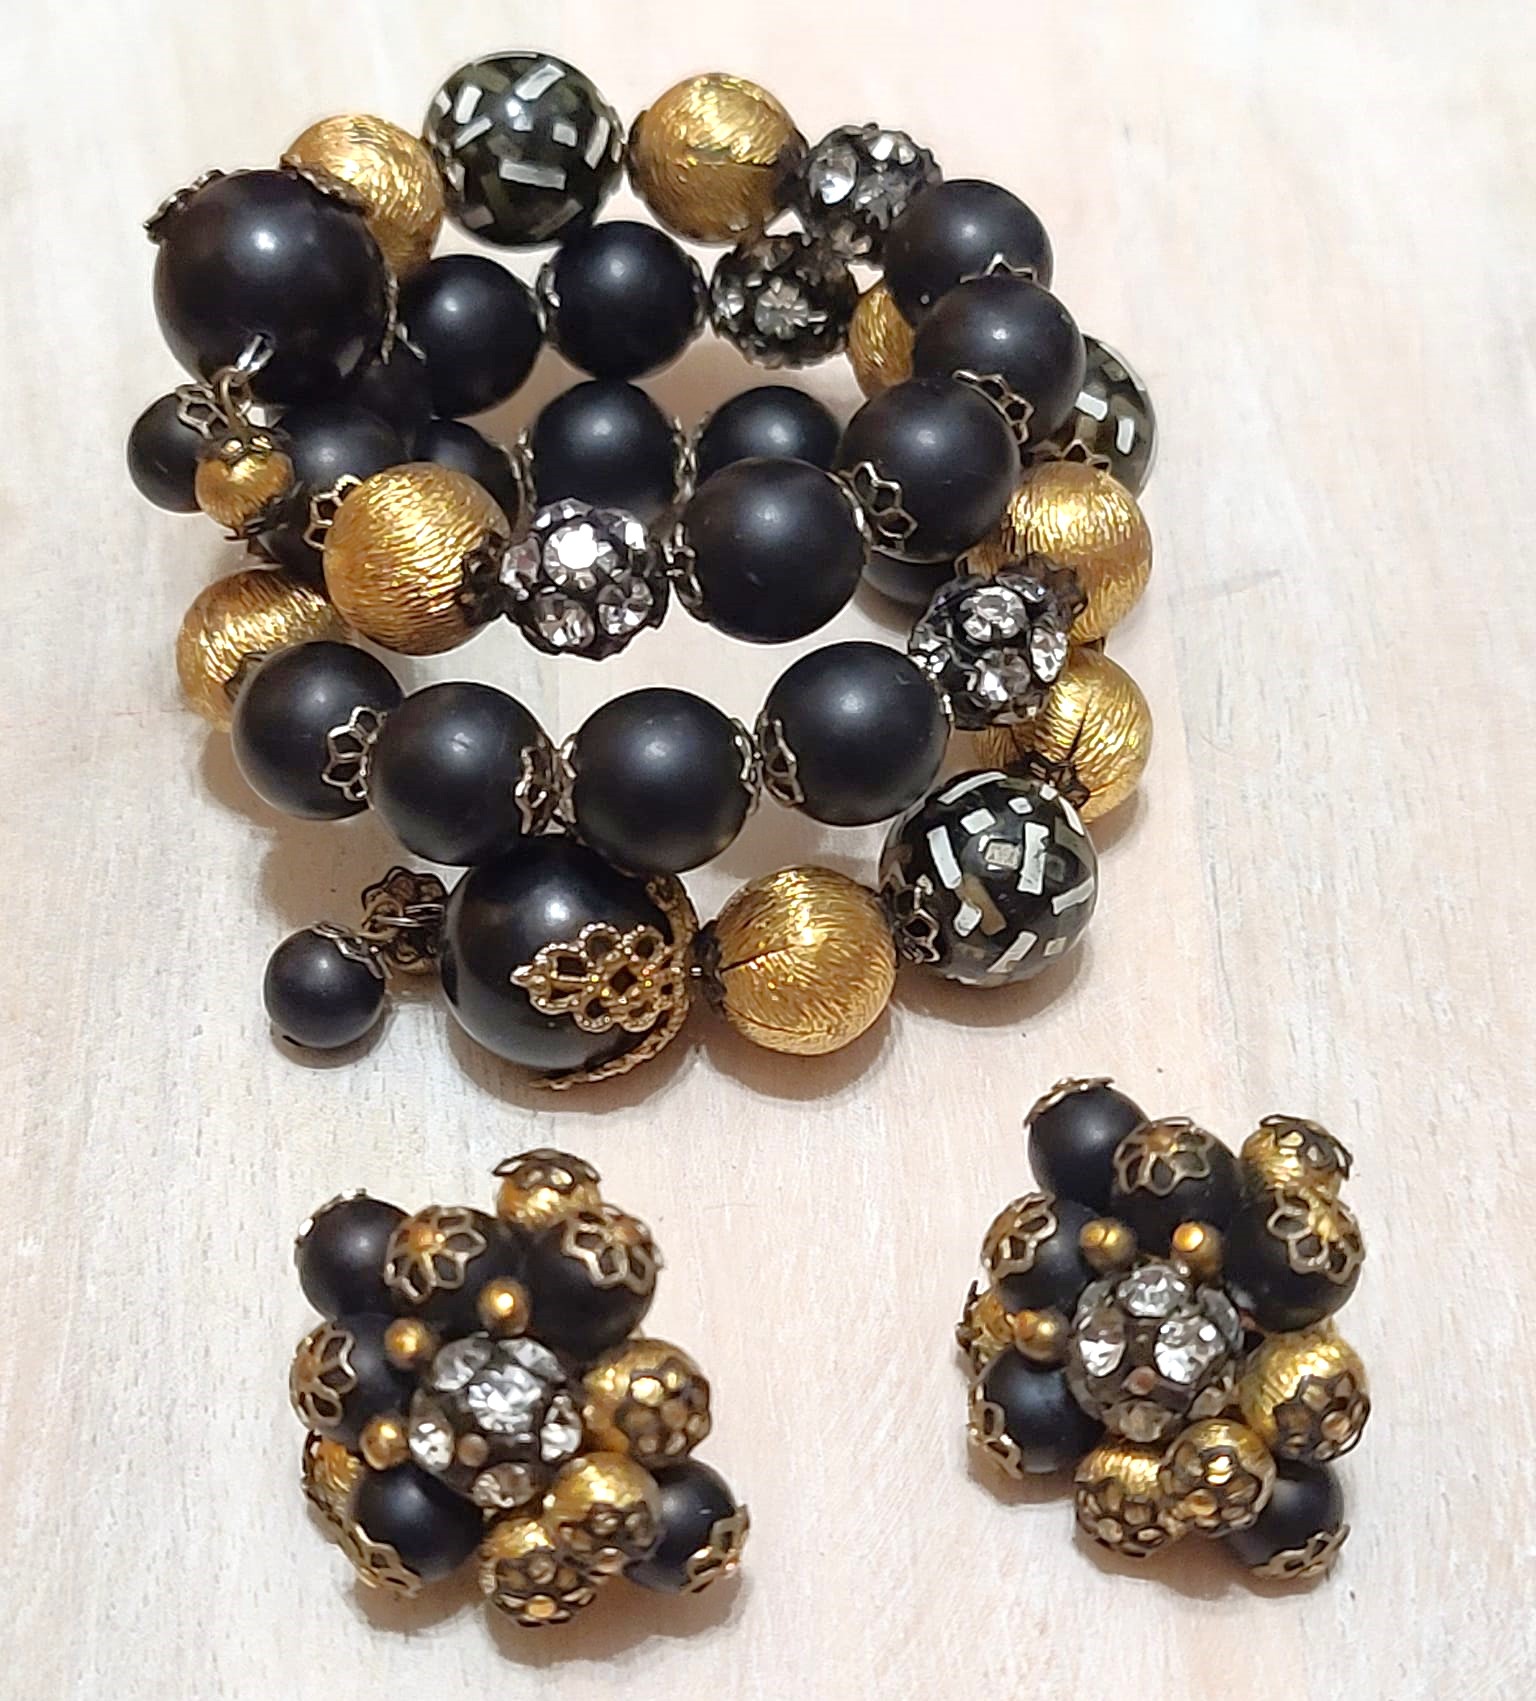 Designer Hobe rhinestone and bead memory wire bracelet and clip on earrings black,confetti,gold